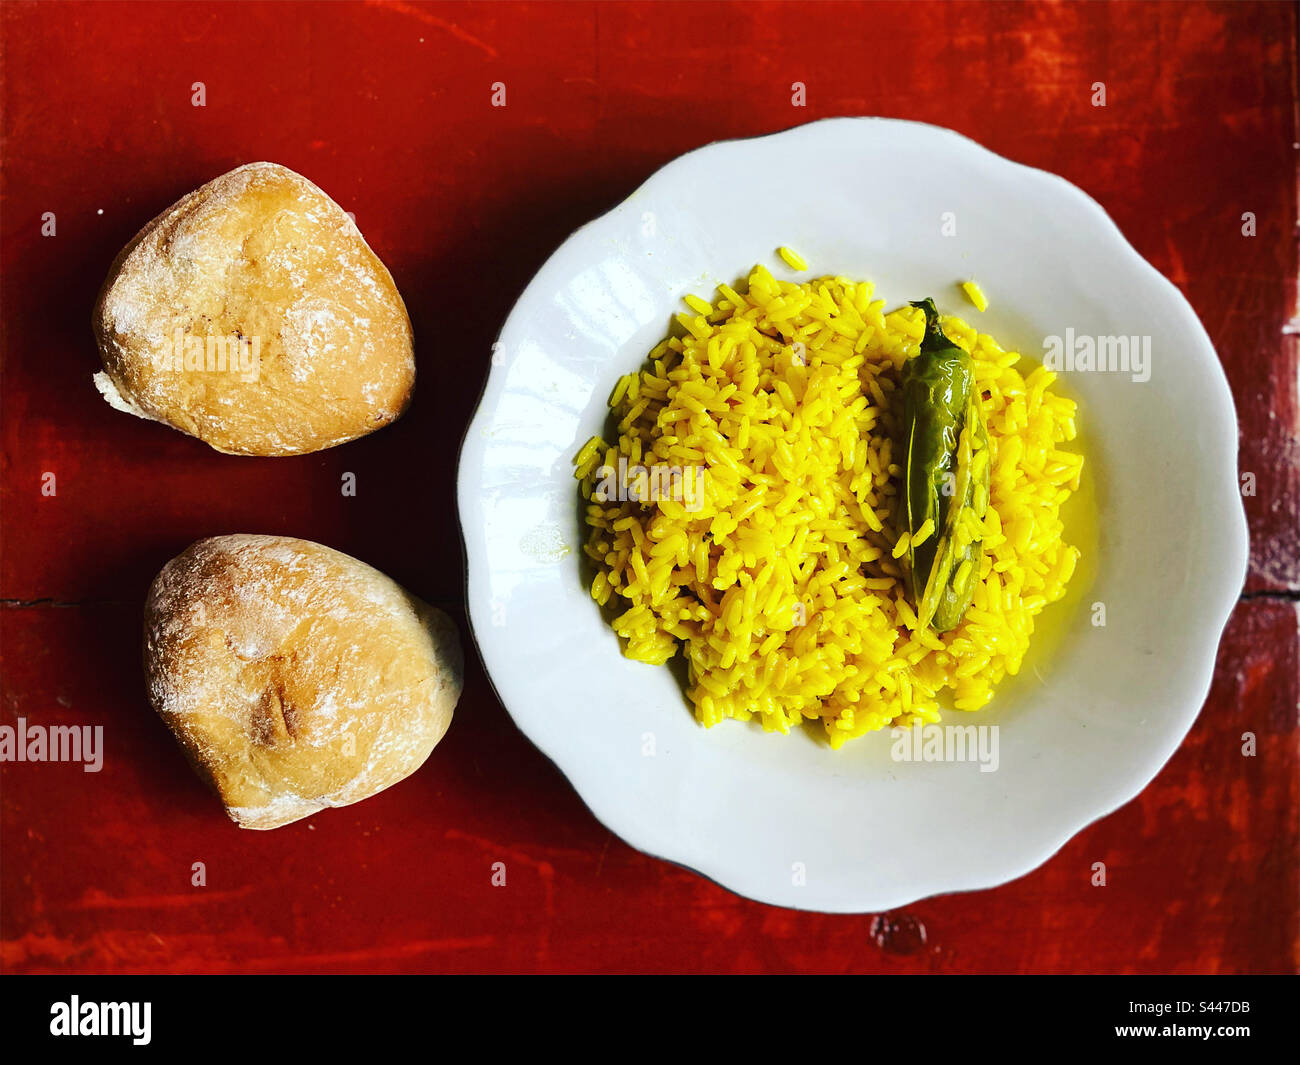 Yellow rice with a red hot chilli pepper and bread in Queretaro, Mexico Stock Photo